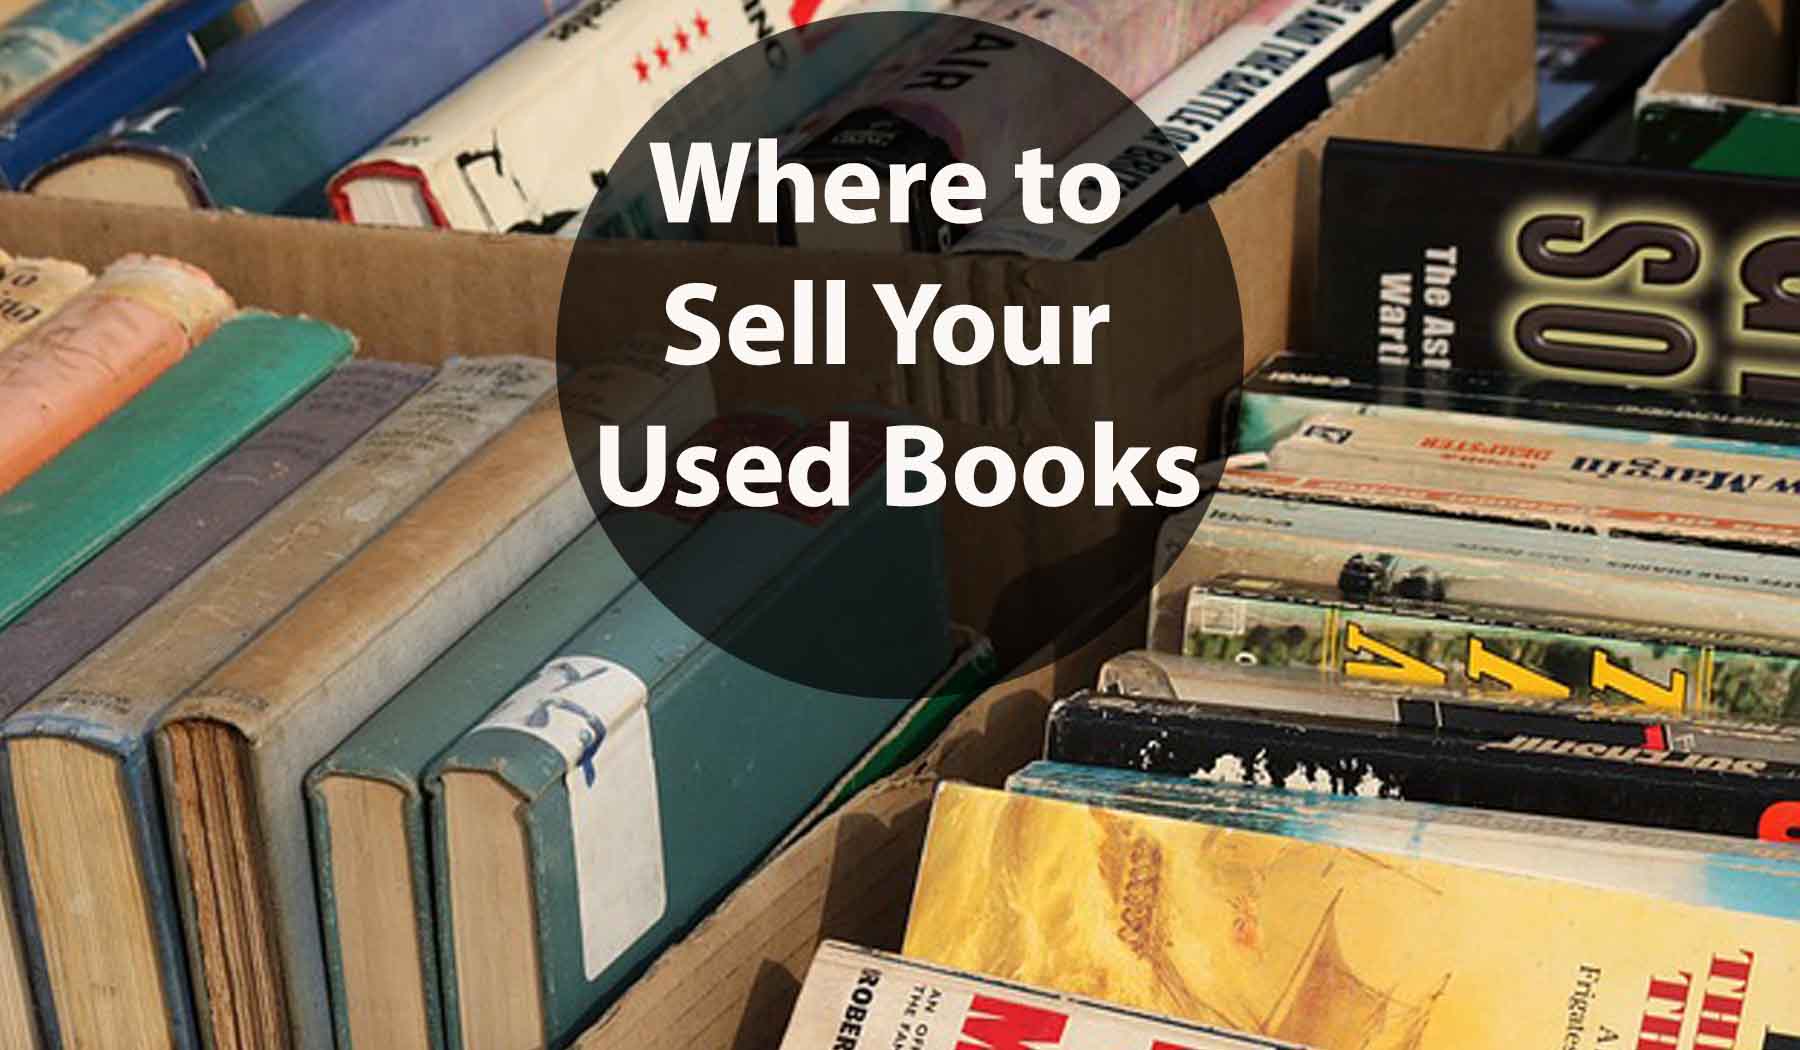 Where to Sell Your Used Books